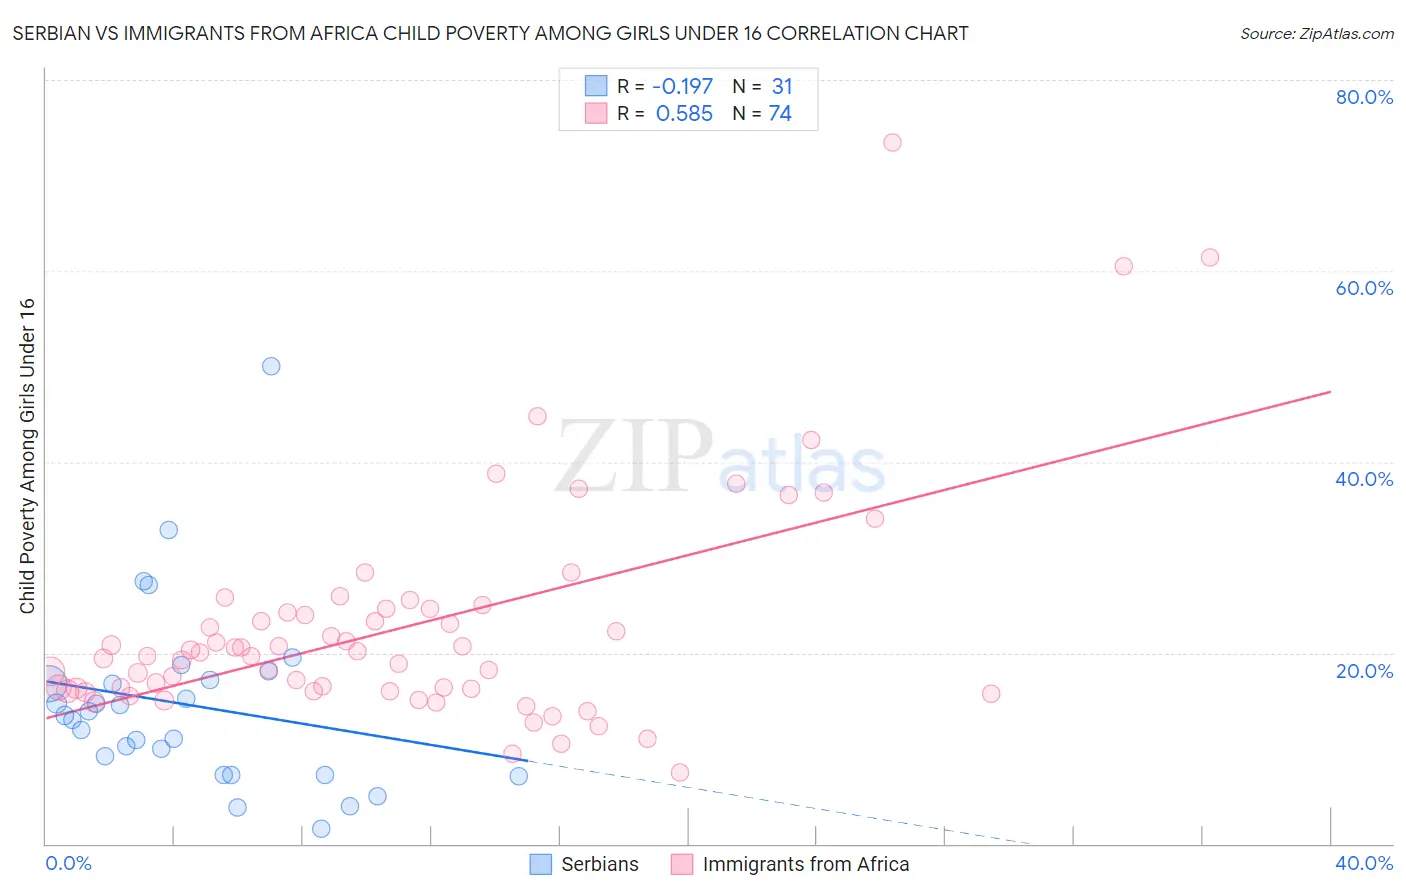 Serbian vs Immigrants from Africa Child Poverty Among Girls Under 16